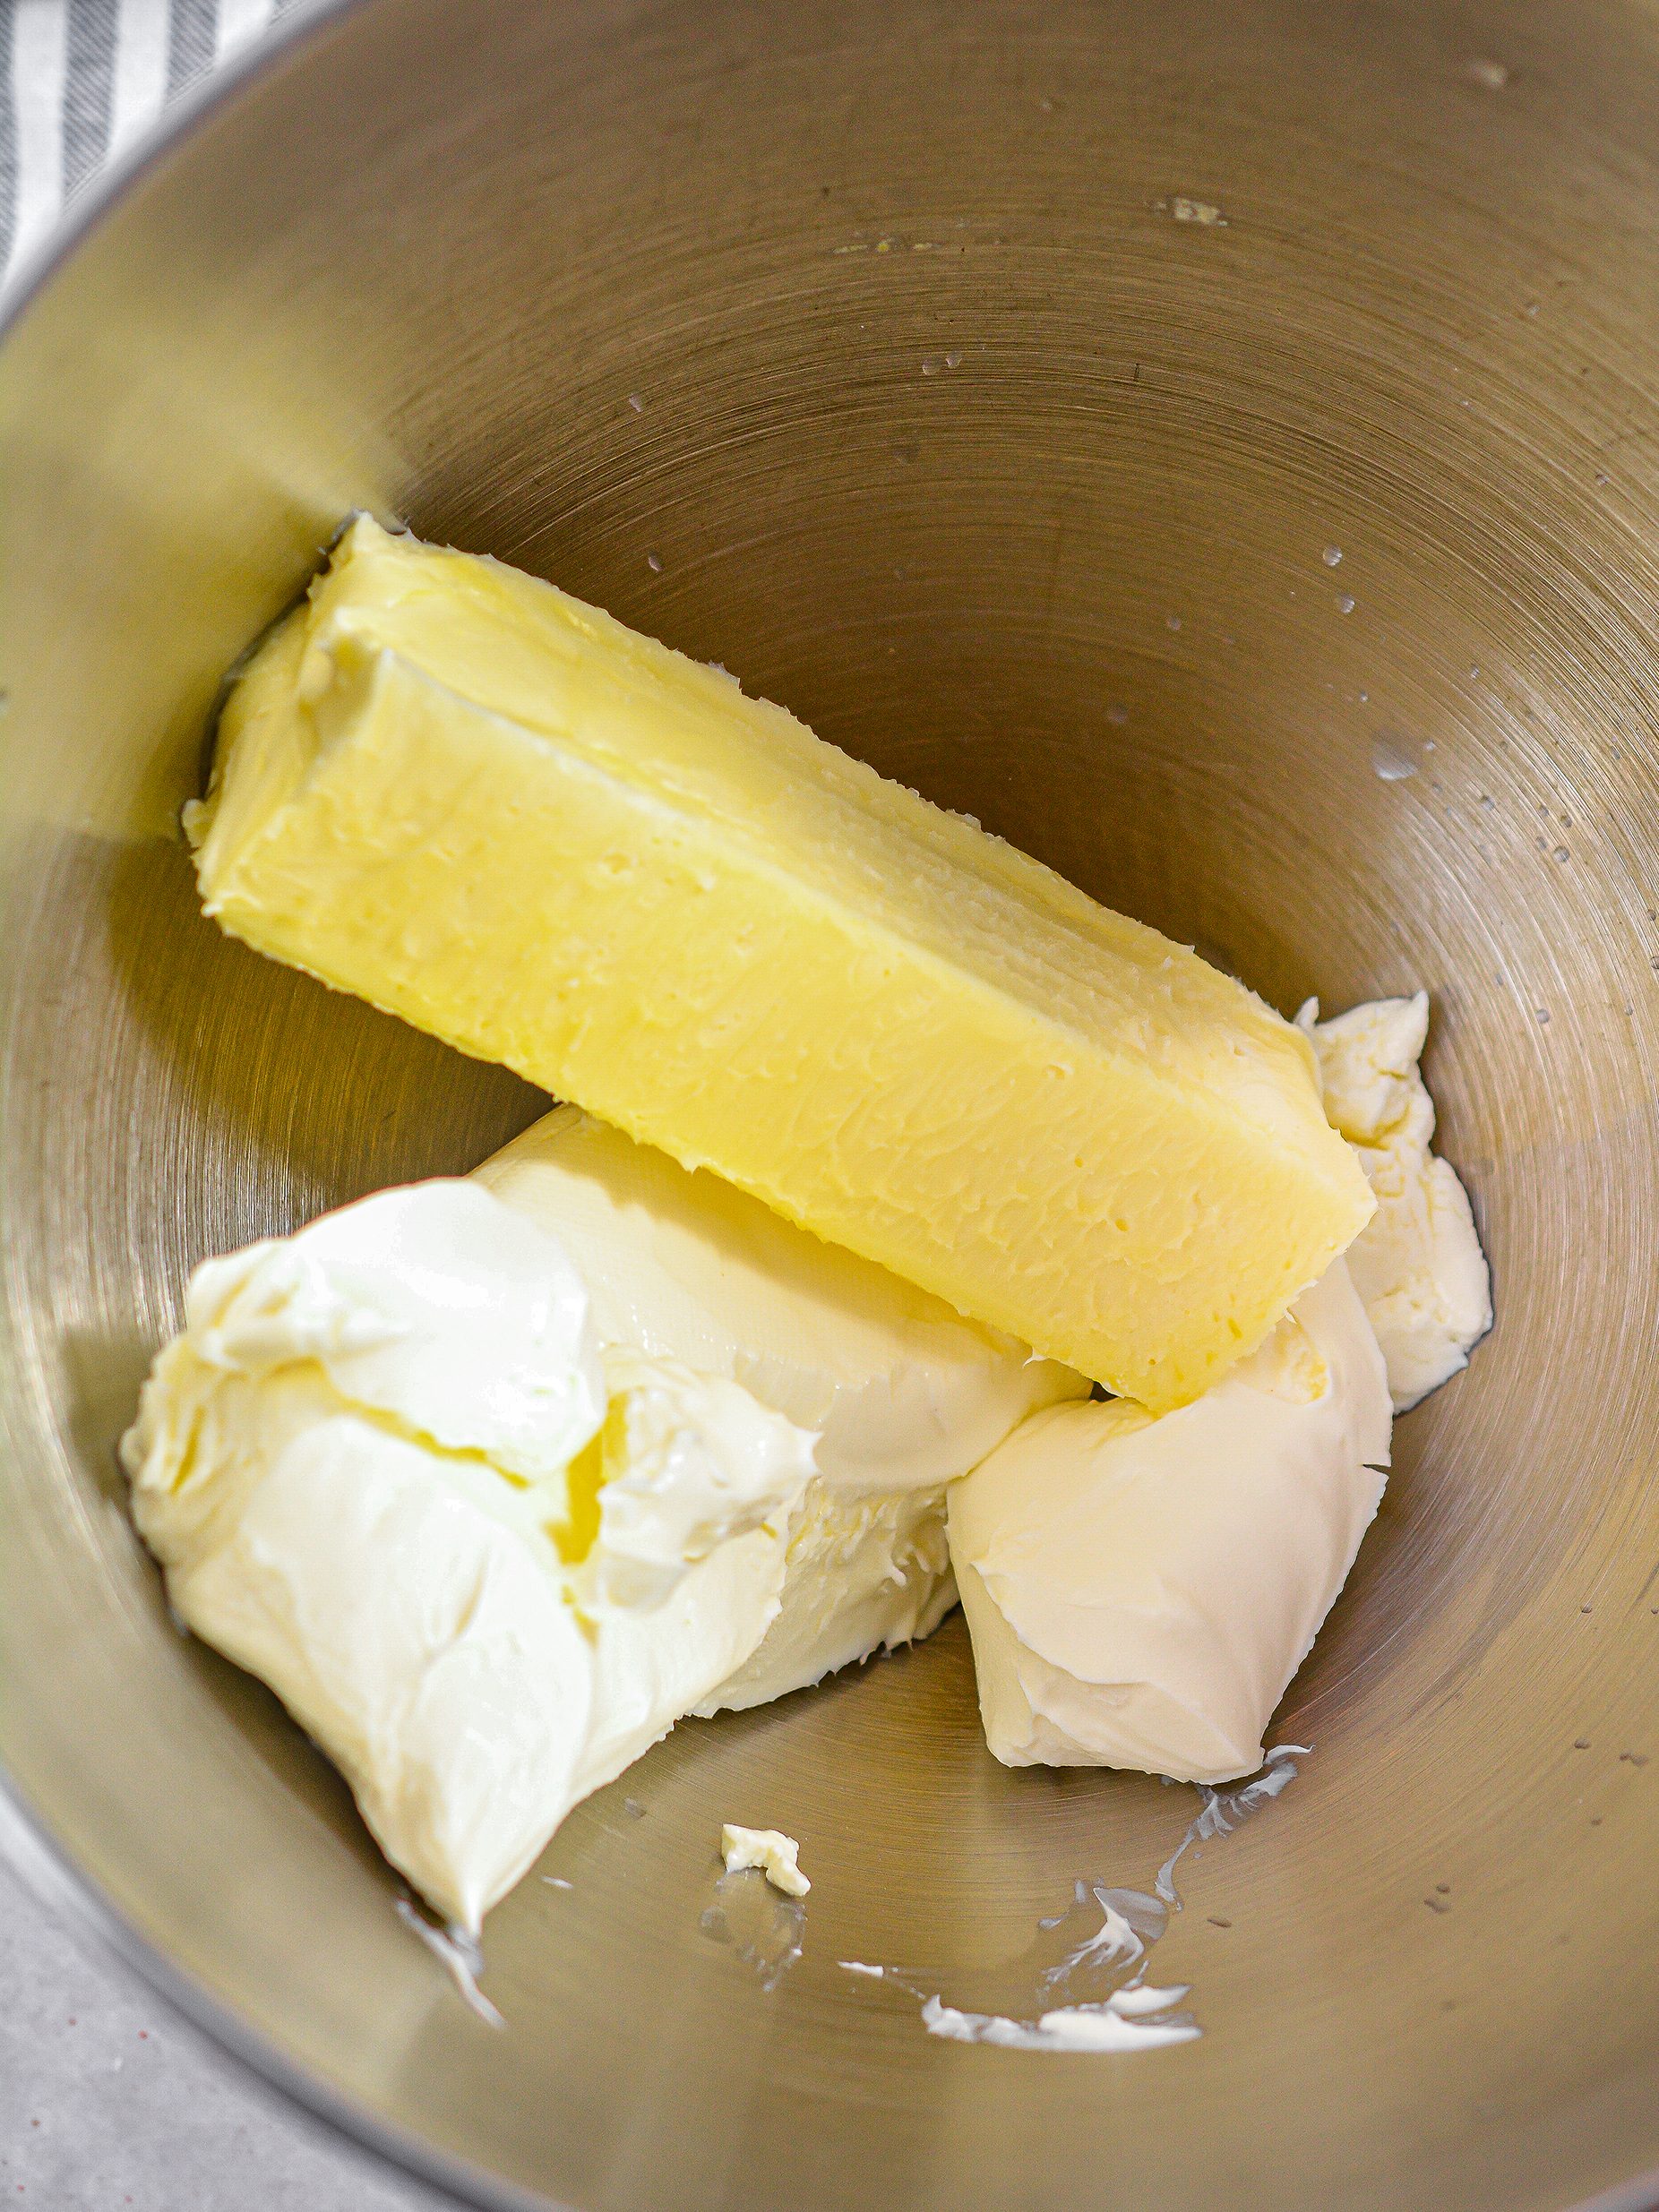 In a mixing bowl, add 8oz cream cheese softened and 1 stick of butter.